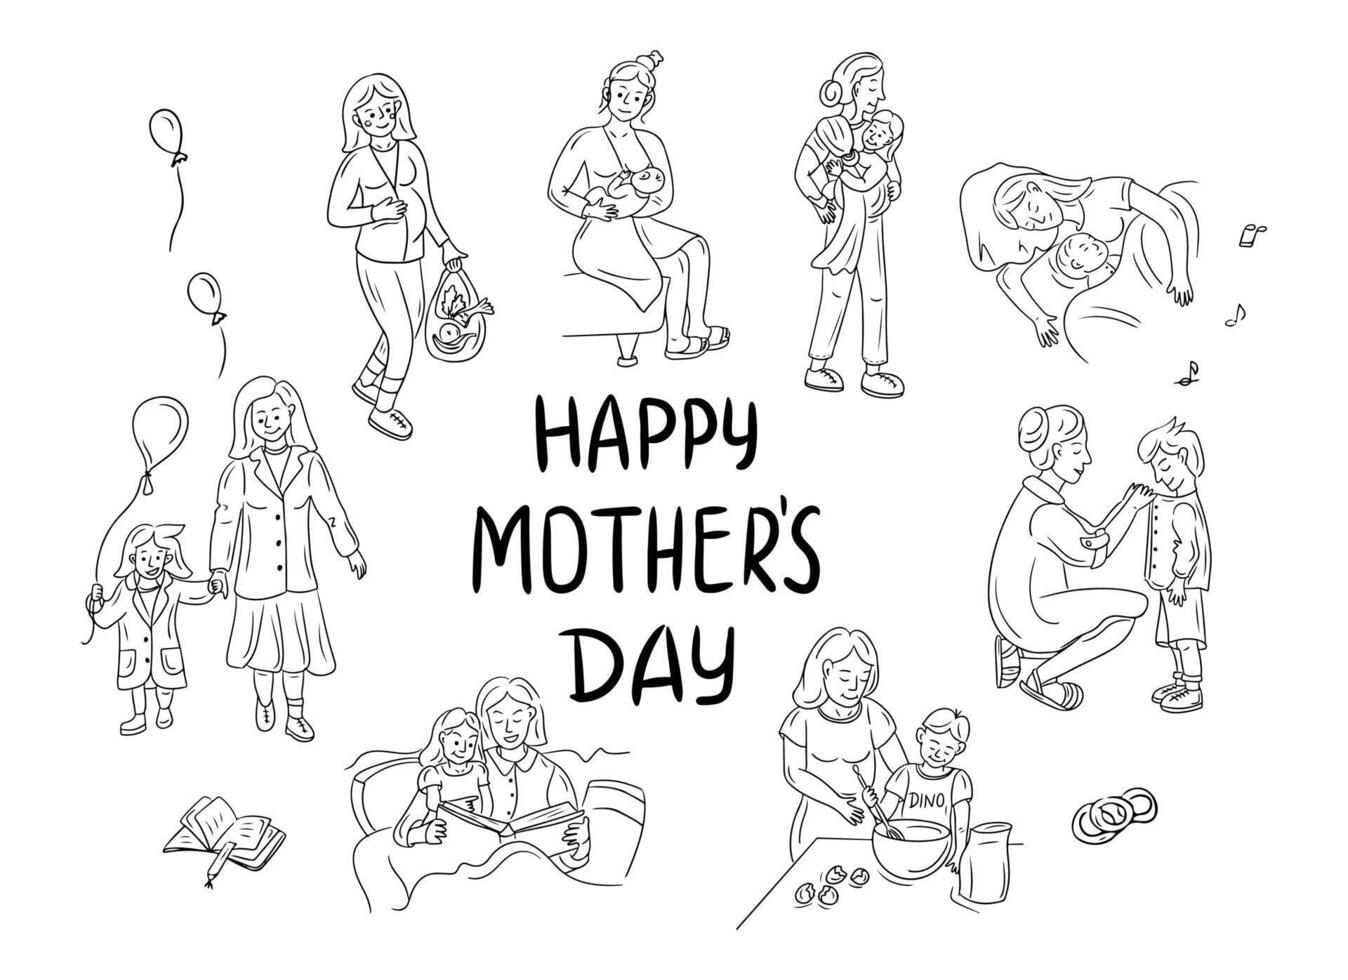 Happy Mothers day doodle contour set. Monochrome black outline drawings of mothers and their babies isolated on white background. Everyday mothers routine. Good for coloring pages, stickers vector